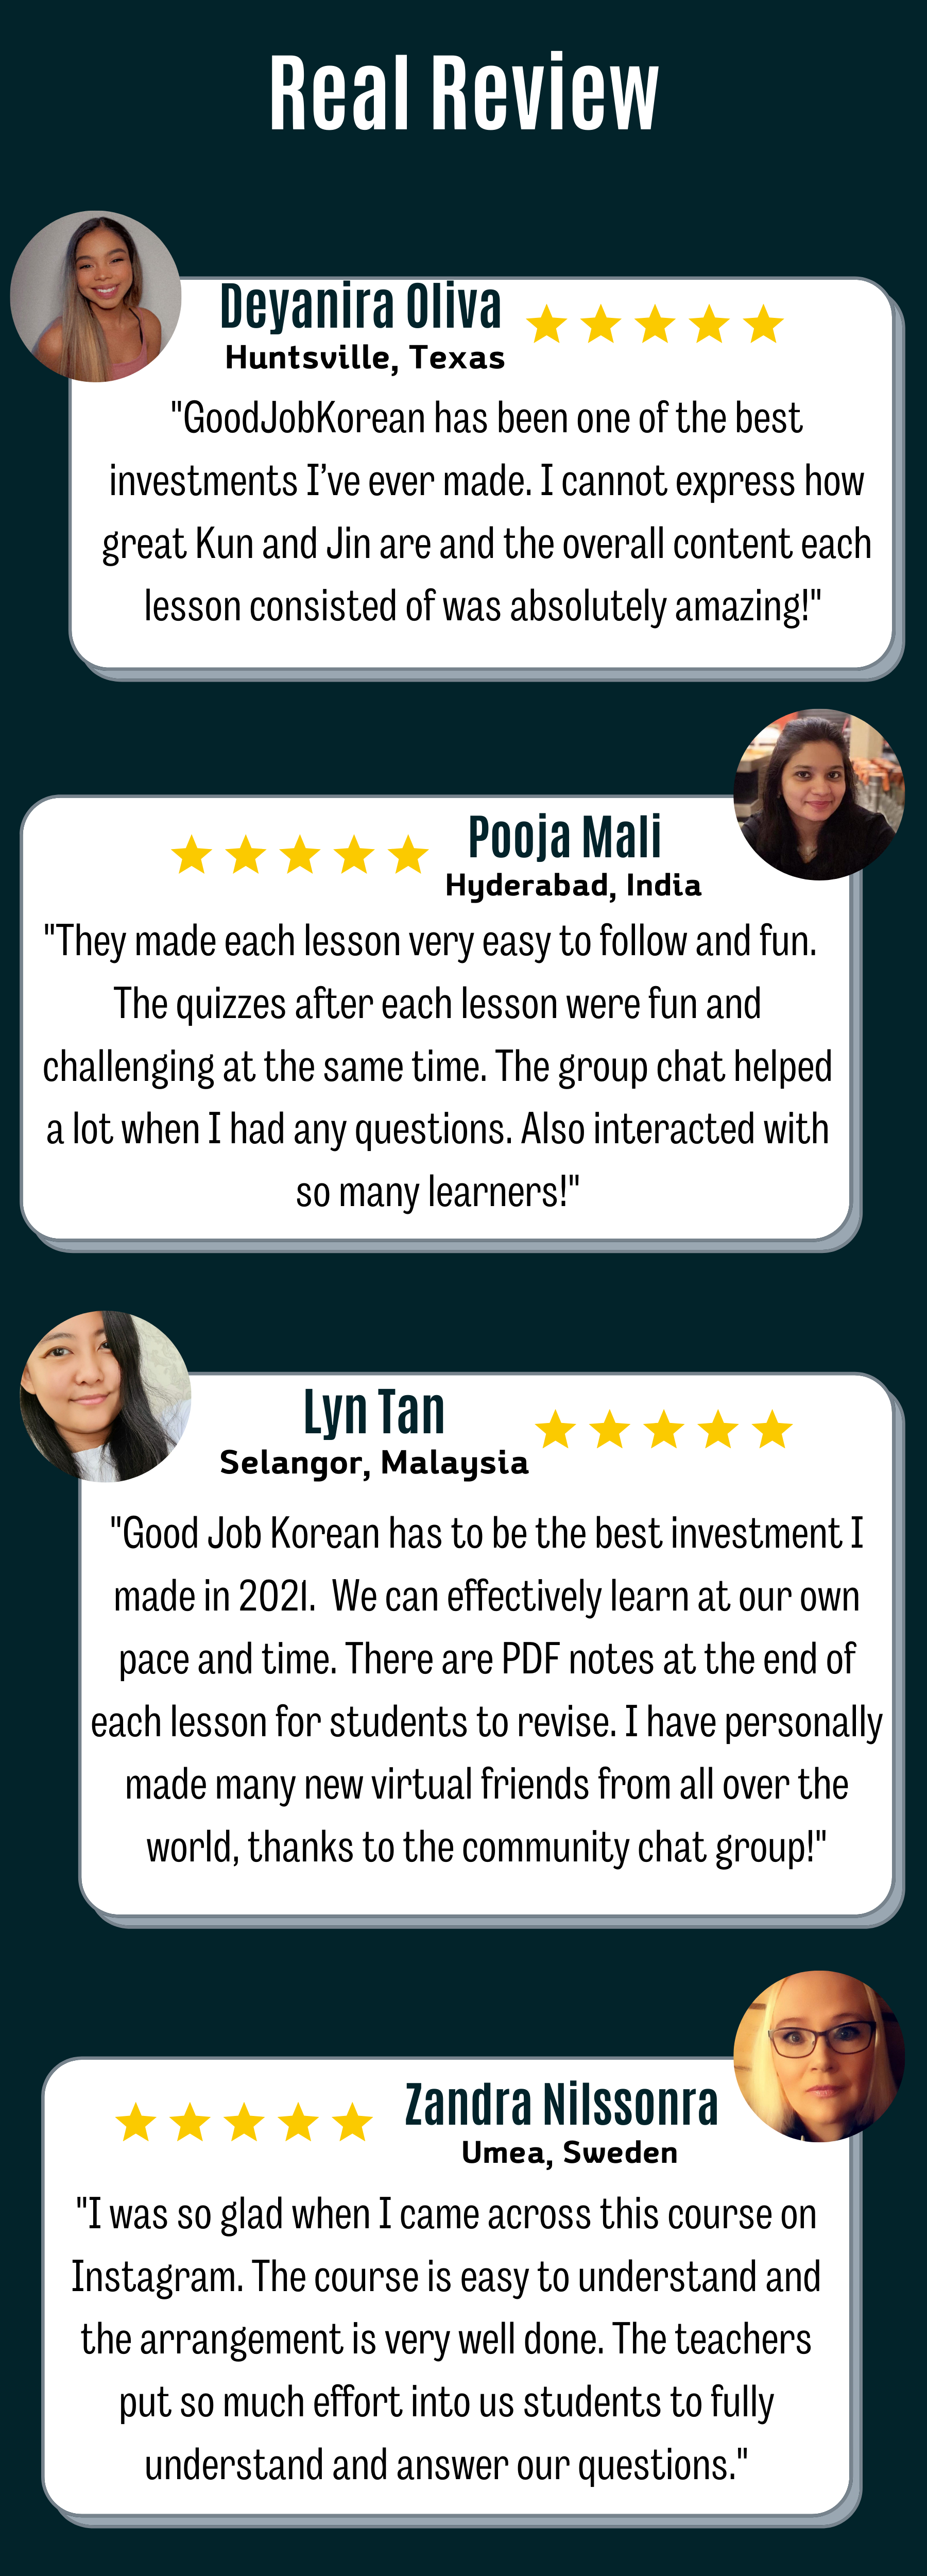 Real Review: 1) Deyanira Oliva from Huntsville, Texas_&quot;GoodJobKorean has been one of the best investments I’ve ever made. I cannot express how great Kun and Jin are and the overall content each lesson consisted of was absolutely amazing!&quot;  2) Pooja Mali from Hyderabad, India: &quot;They made each lesson very easy to follow and fun.  The quizzes after each lesson were fun and challenging at the same time. The group chat helped a lot when I had any questions. Also interacted with so many learners!&quot; 3) Lyn Tan from Selangor, Malaysia: &quot;Good Job Korean has to be the best investment I made in 2021.  We can effectively learn at our own pace and time. There are PDF notes at the end of each lesson for students to revise. I have personally made many new virtual friends from all over the world, thanks to the community chat group!&quot; 4) Zandra Nilssonra from Umea, Sweden :&quot;I was so glad when I came across this course on Instagram. The course is easy to understand and the arrangement is very well done. The teachers put so much effort into us students to fully understand and answer our questions.&quot; 